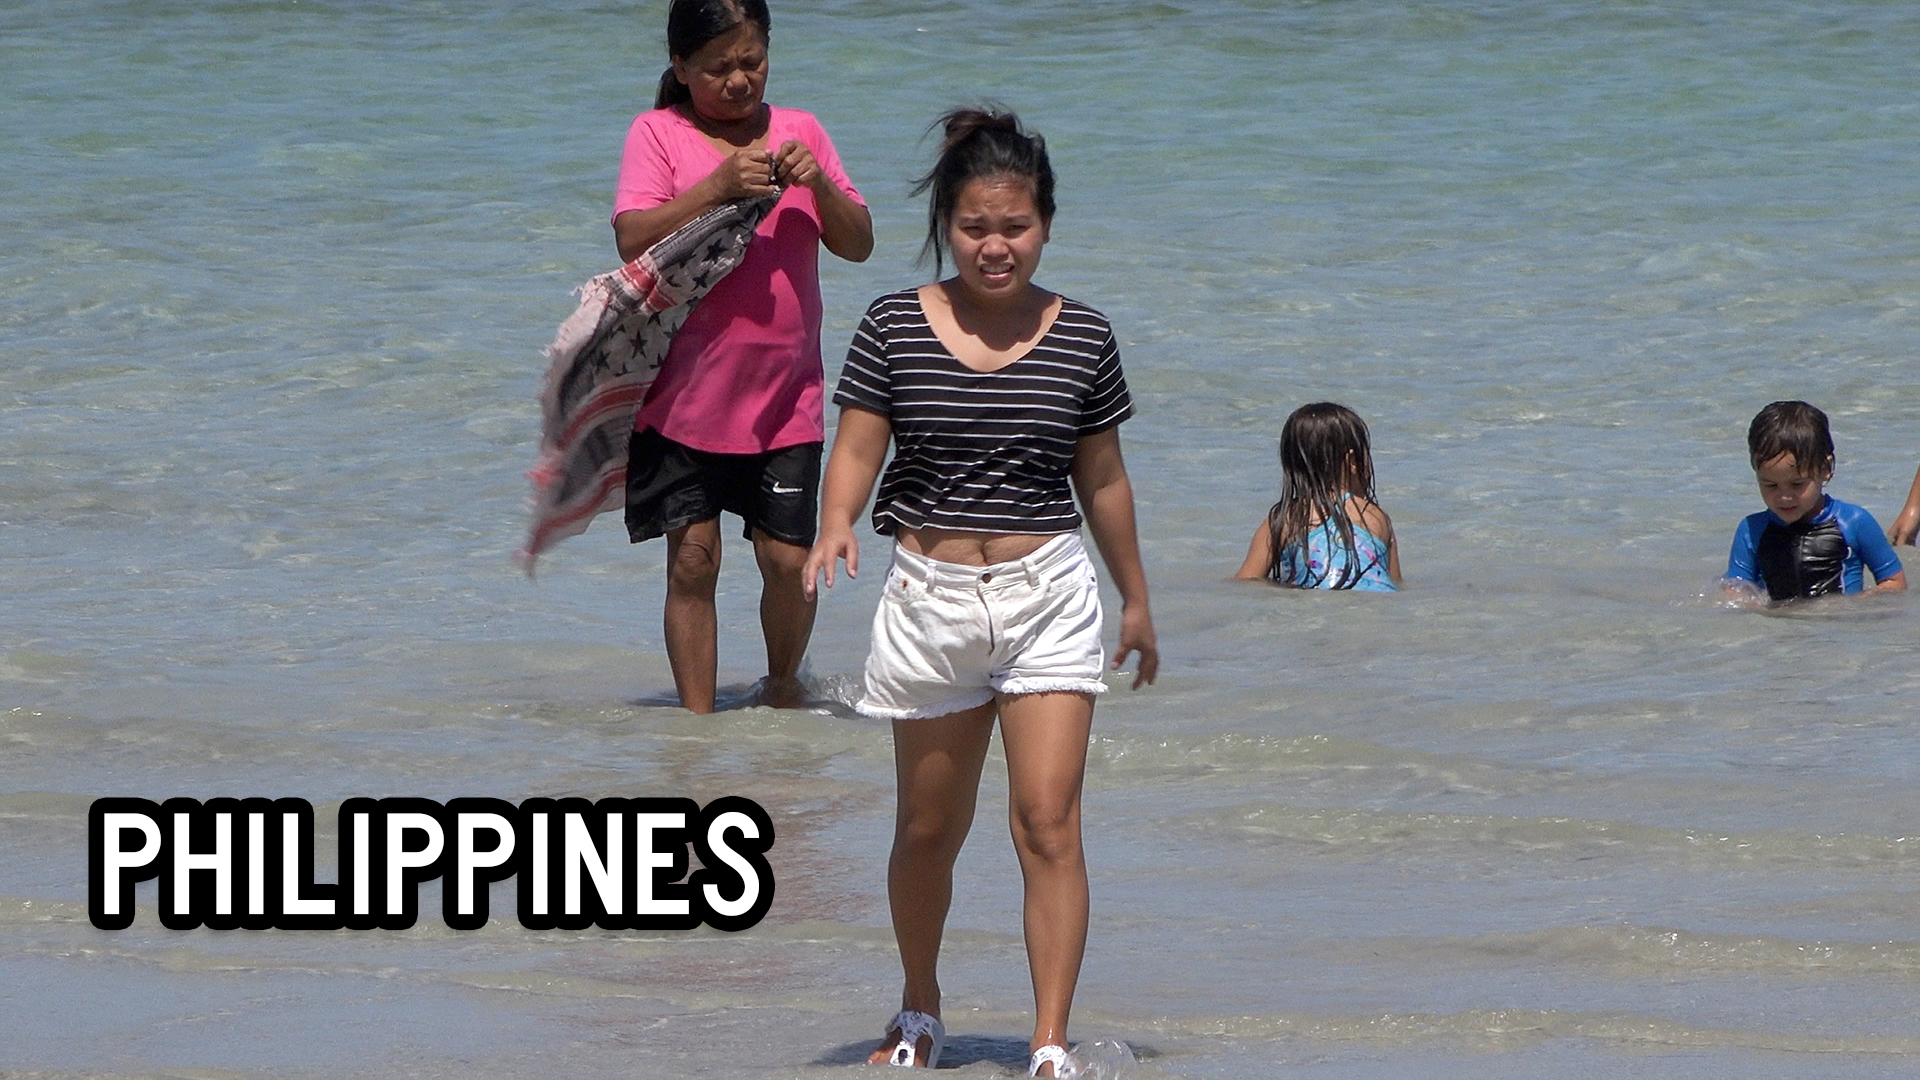 Philippines Lifestyle Overstay Road Family Day at the Beach Village Life